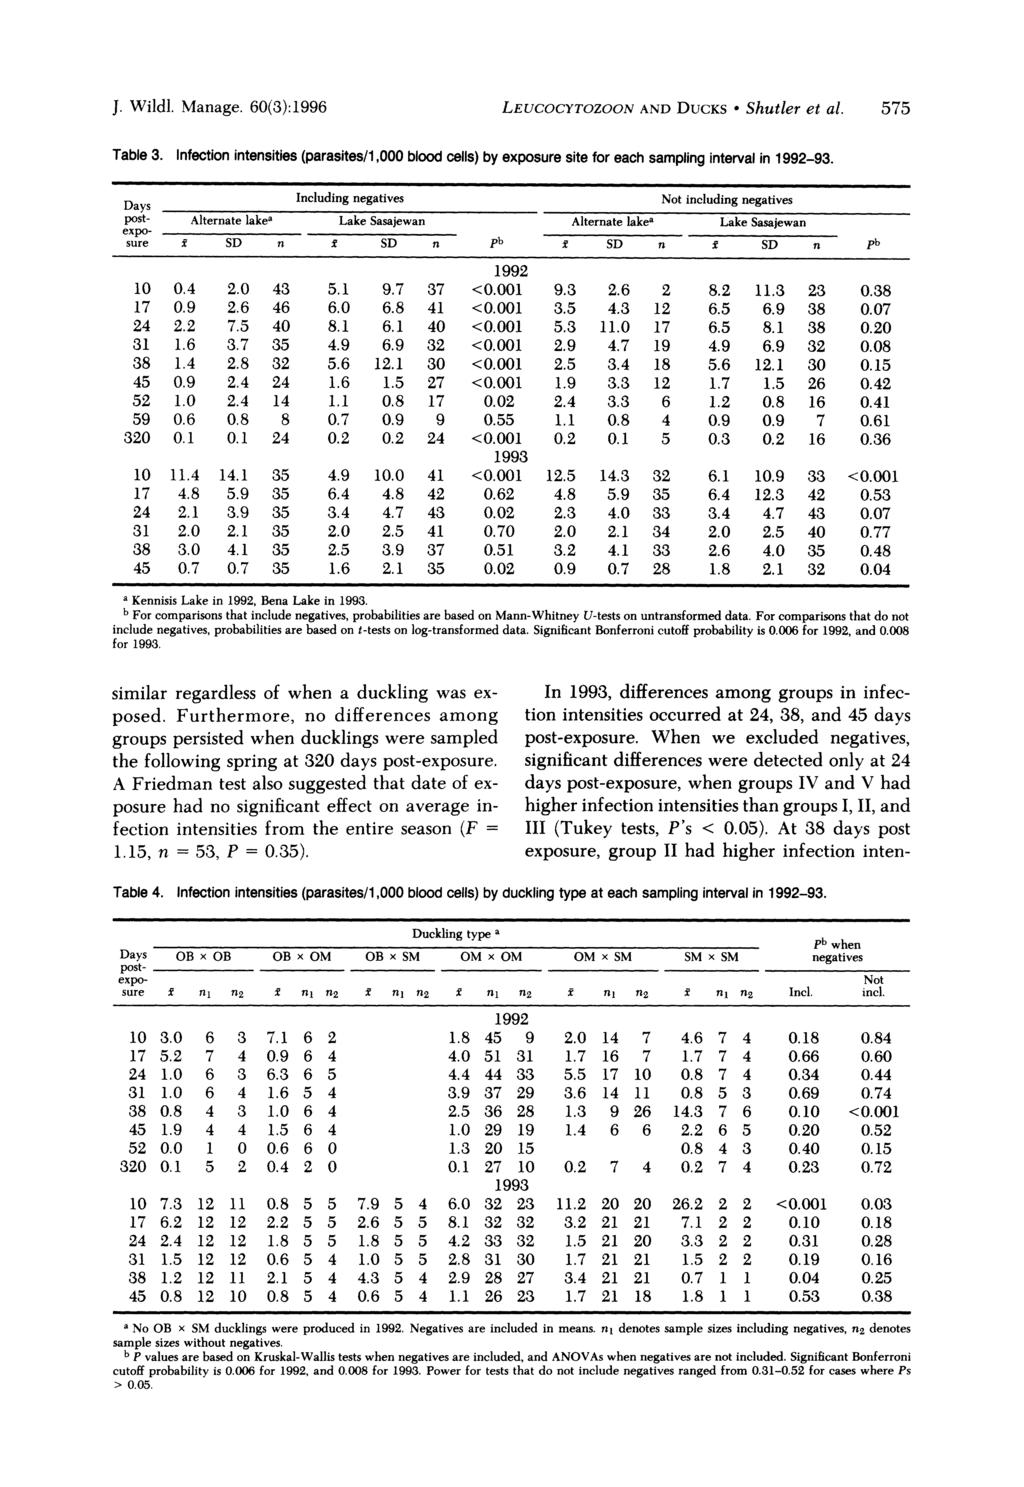 J. Wildl. Manage. 0(3):199 LEUCOCYTOZOON AND DUCKS * Shutler et al. Table 3. Infection intensities (parasites/1,000 blood cells) by exposure site for each sampling interval in 199-93.